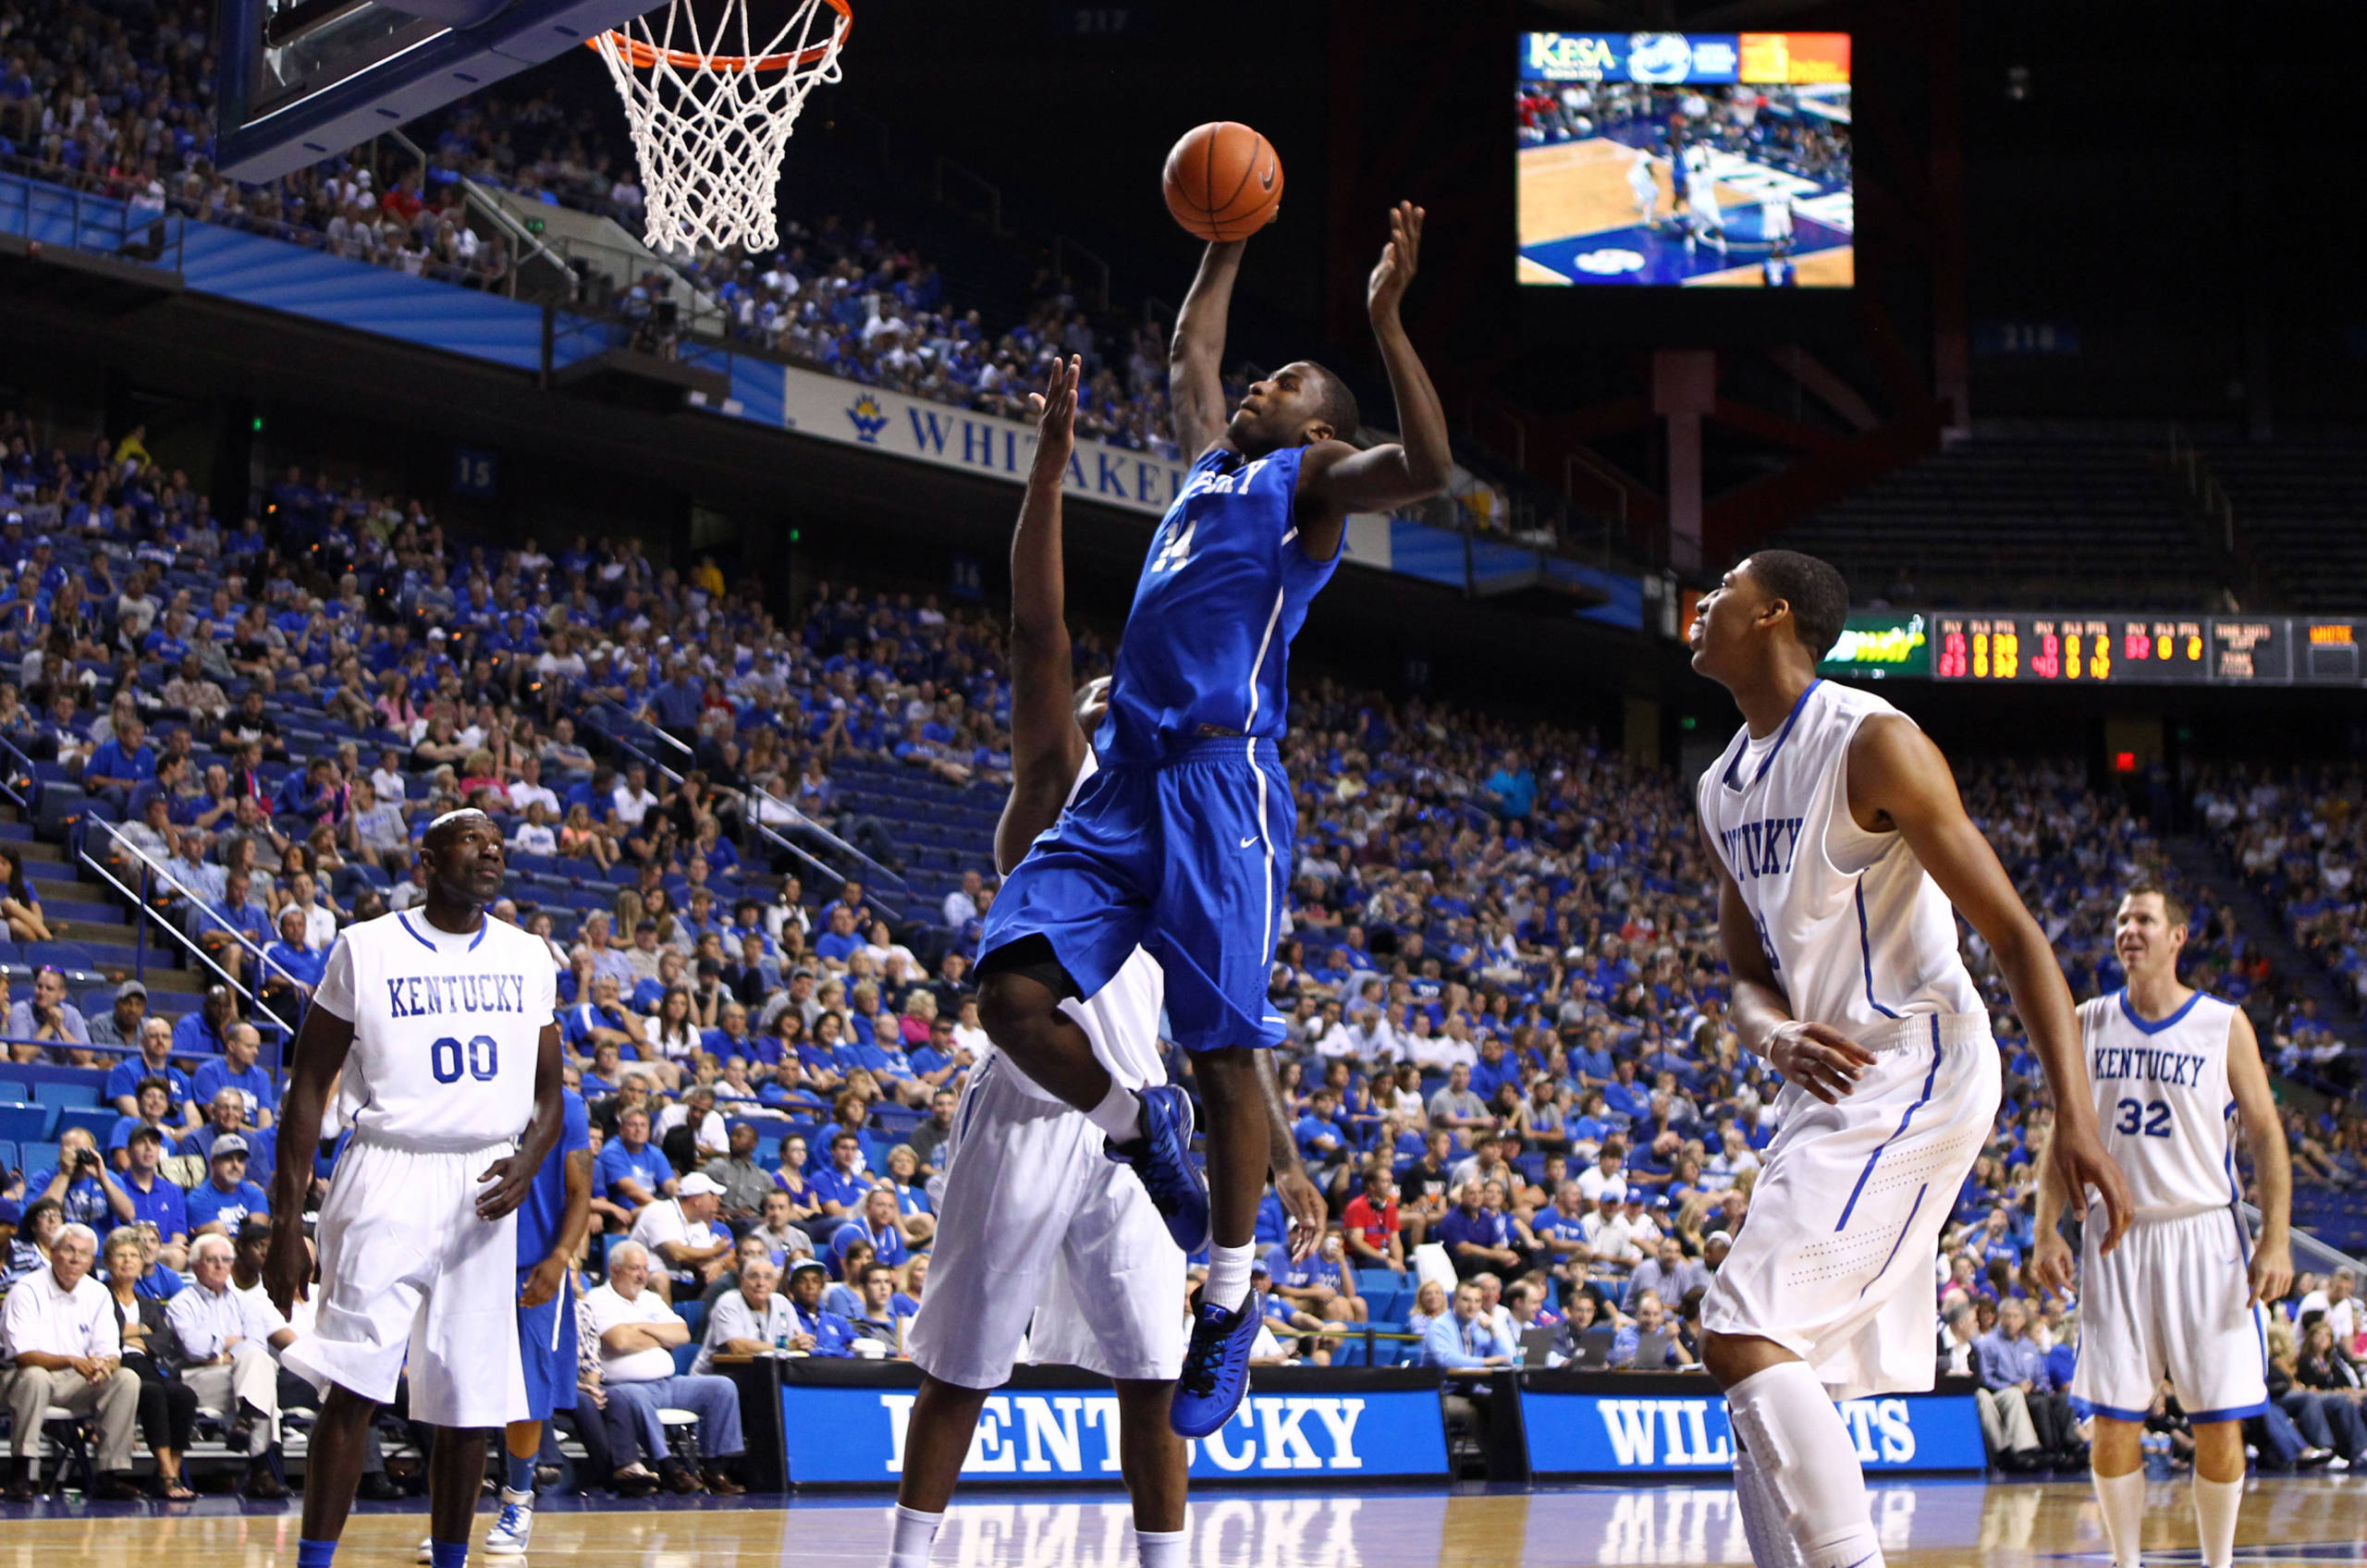 UK Alumni Charity Game Tickets on Sale Friday at 10 a.m. ET